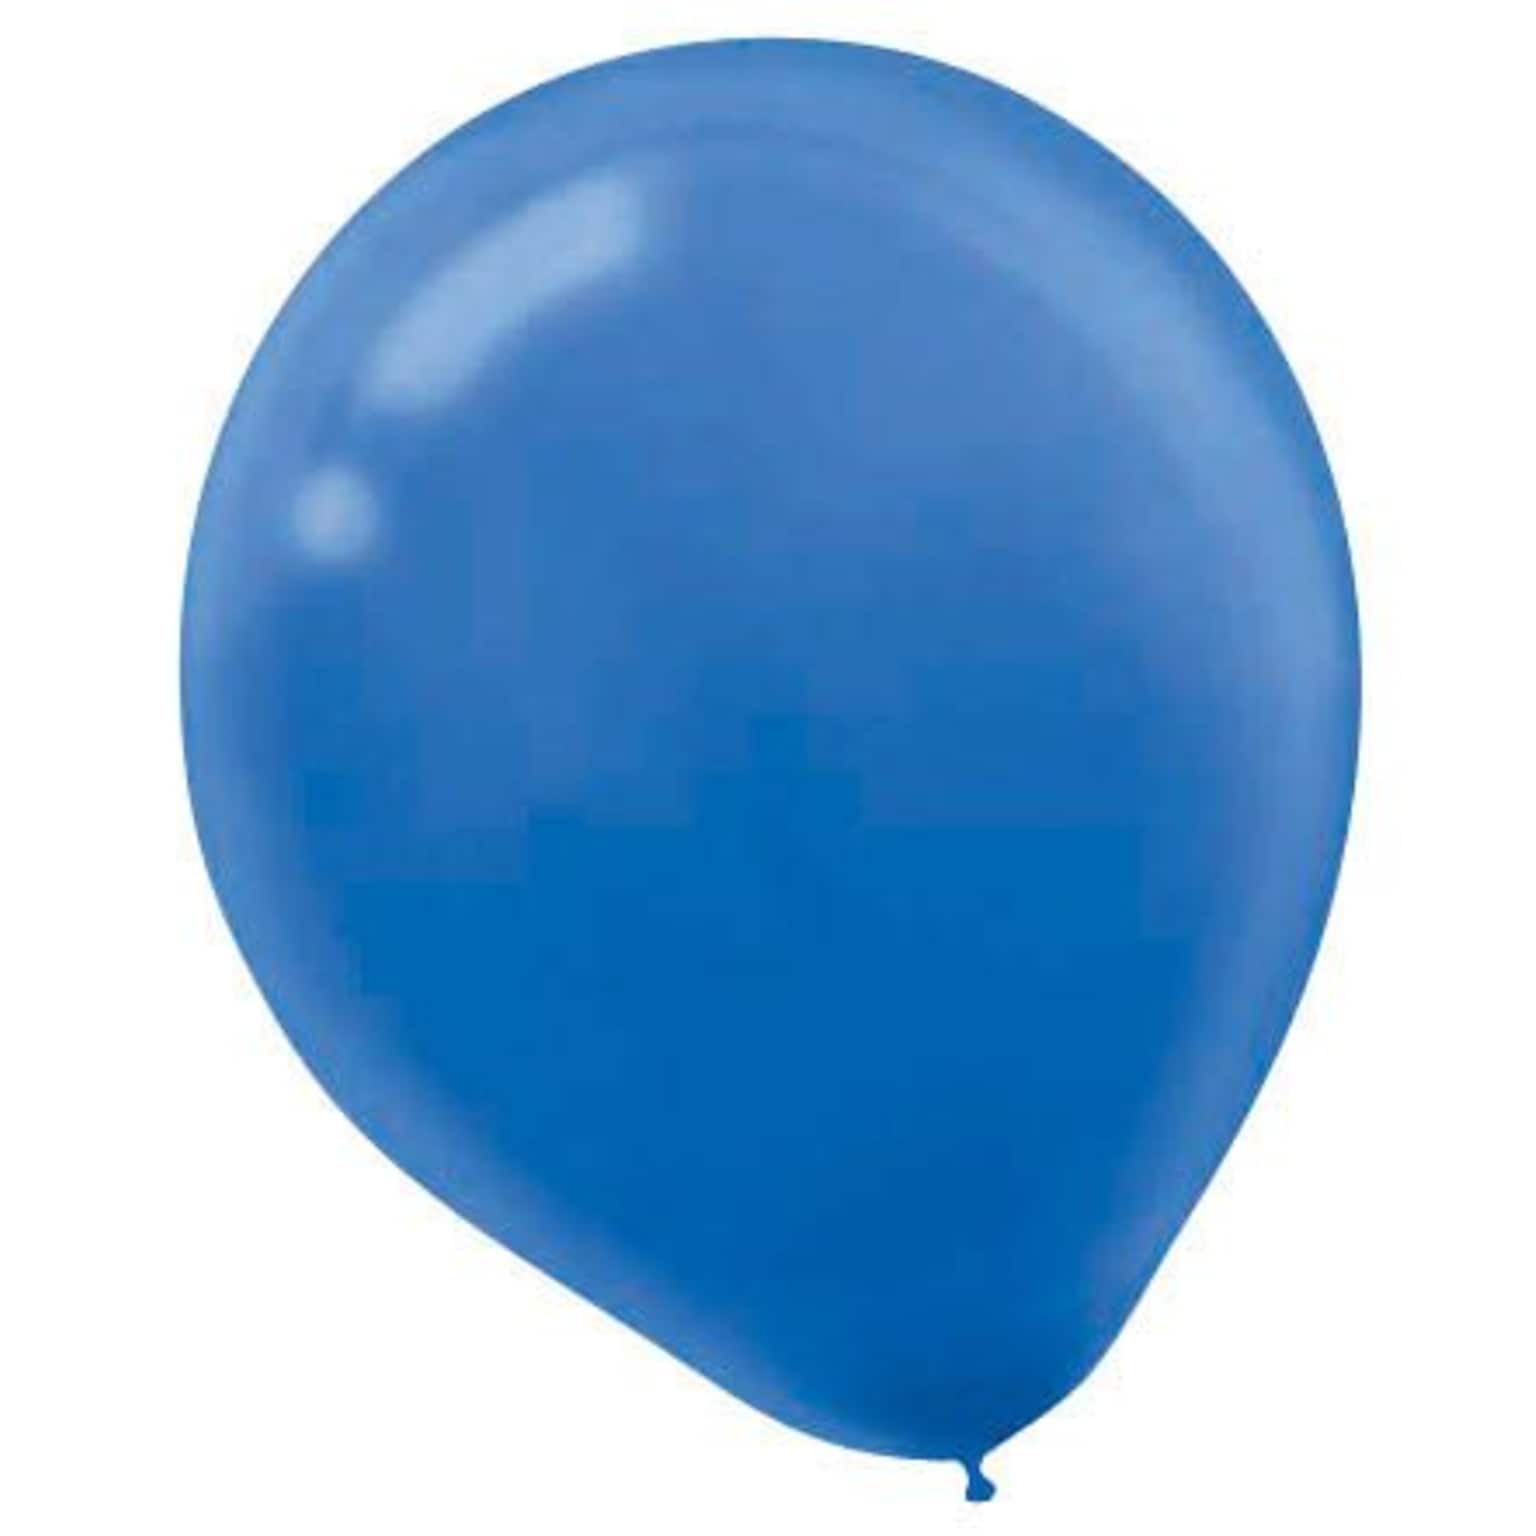 Amscan Solid Color Packaged Latex Balloons, 12, Bright Royal Blue, 18/Pack, 15 Per Pack (113252.105)